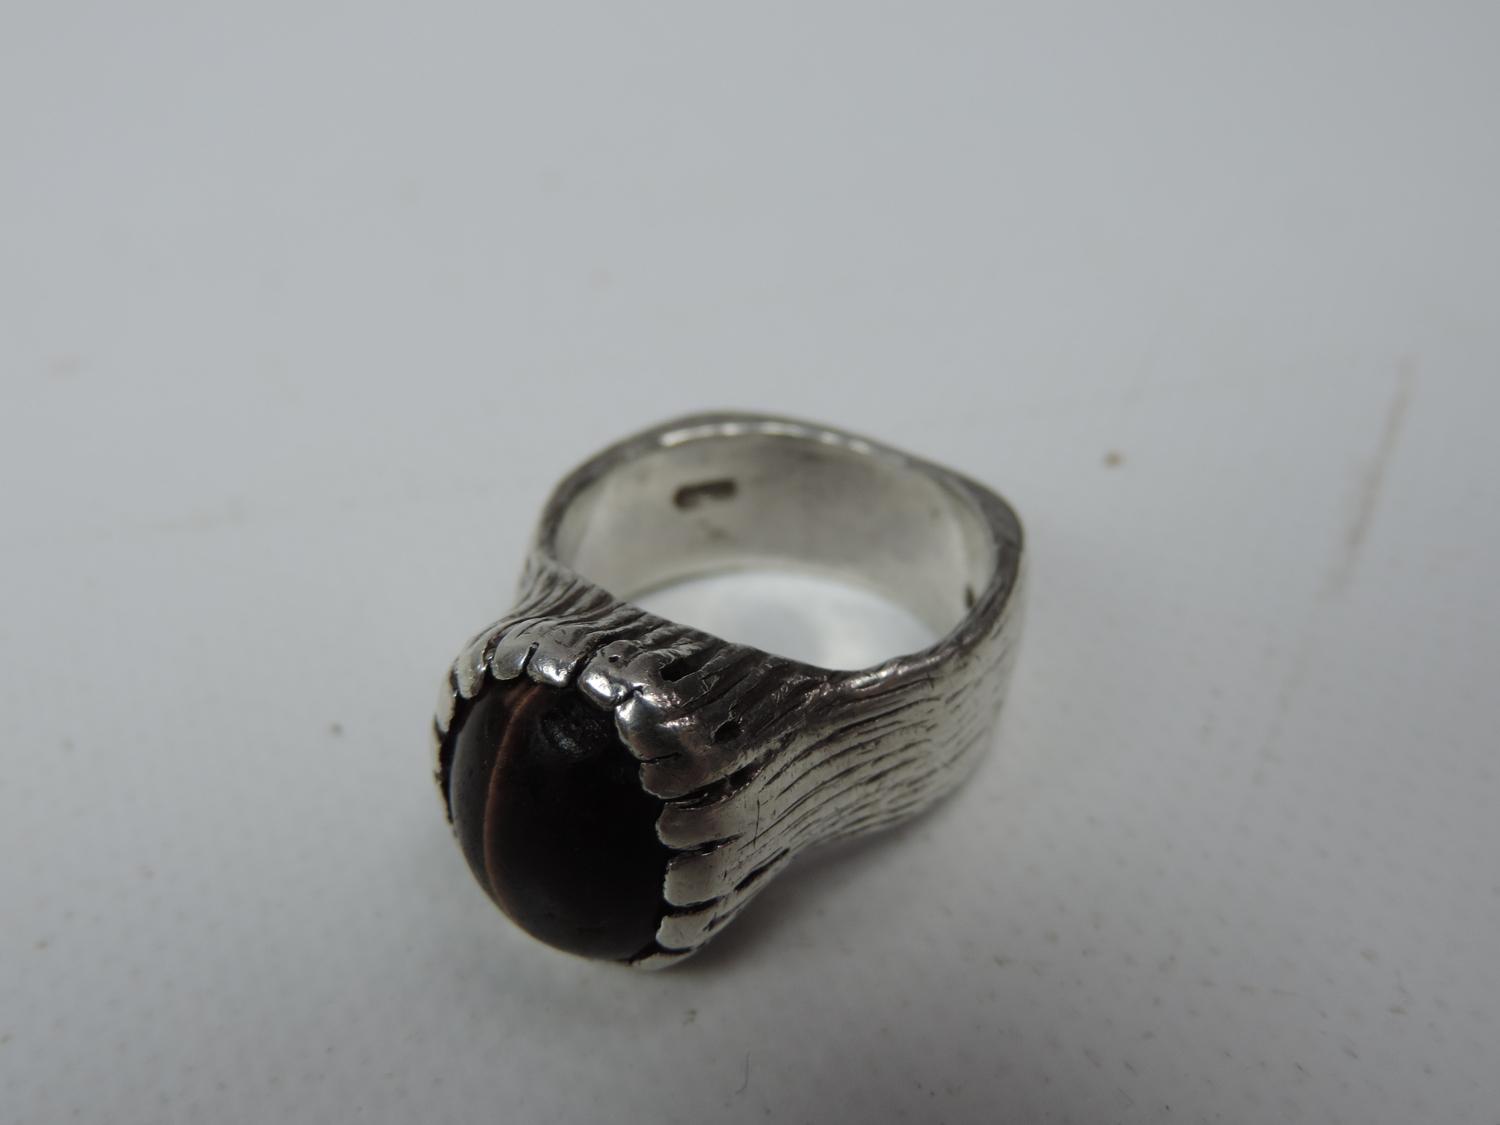 Unusual Silver and Tiger's Eye Ring - London 1969 - 13 grams - Image 4 of 4